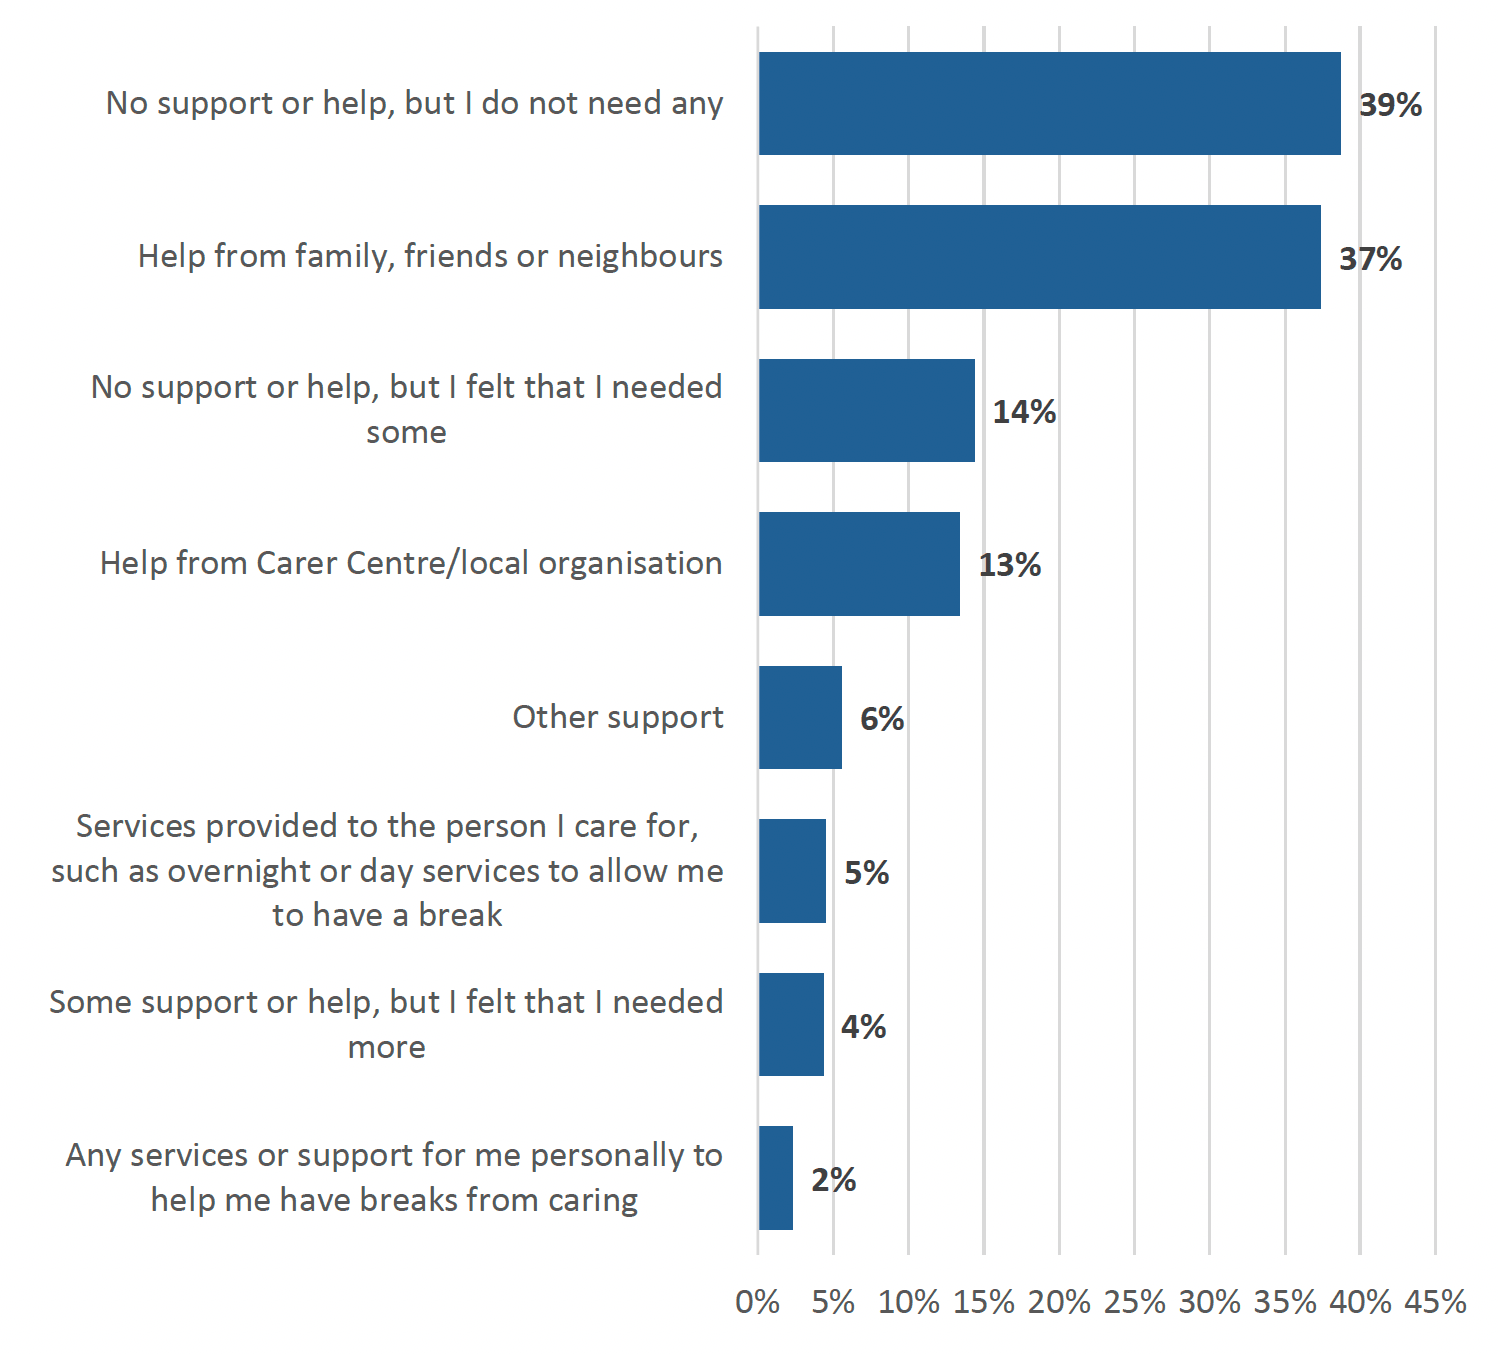 The graph shows that 39% of carers receive no support to help with their caring role, but do not need any. 14% of carers do not get any support or help, but feel they need some, and 4% receive some support or help, but feel they need more.